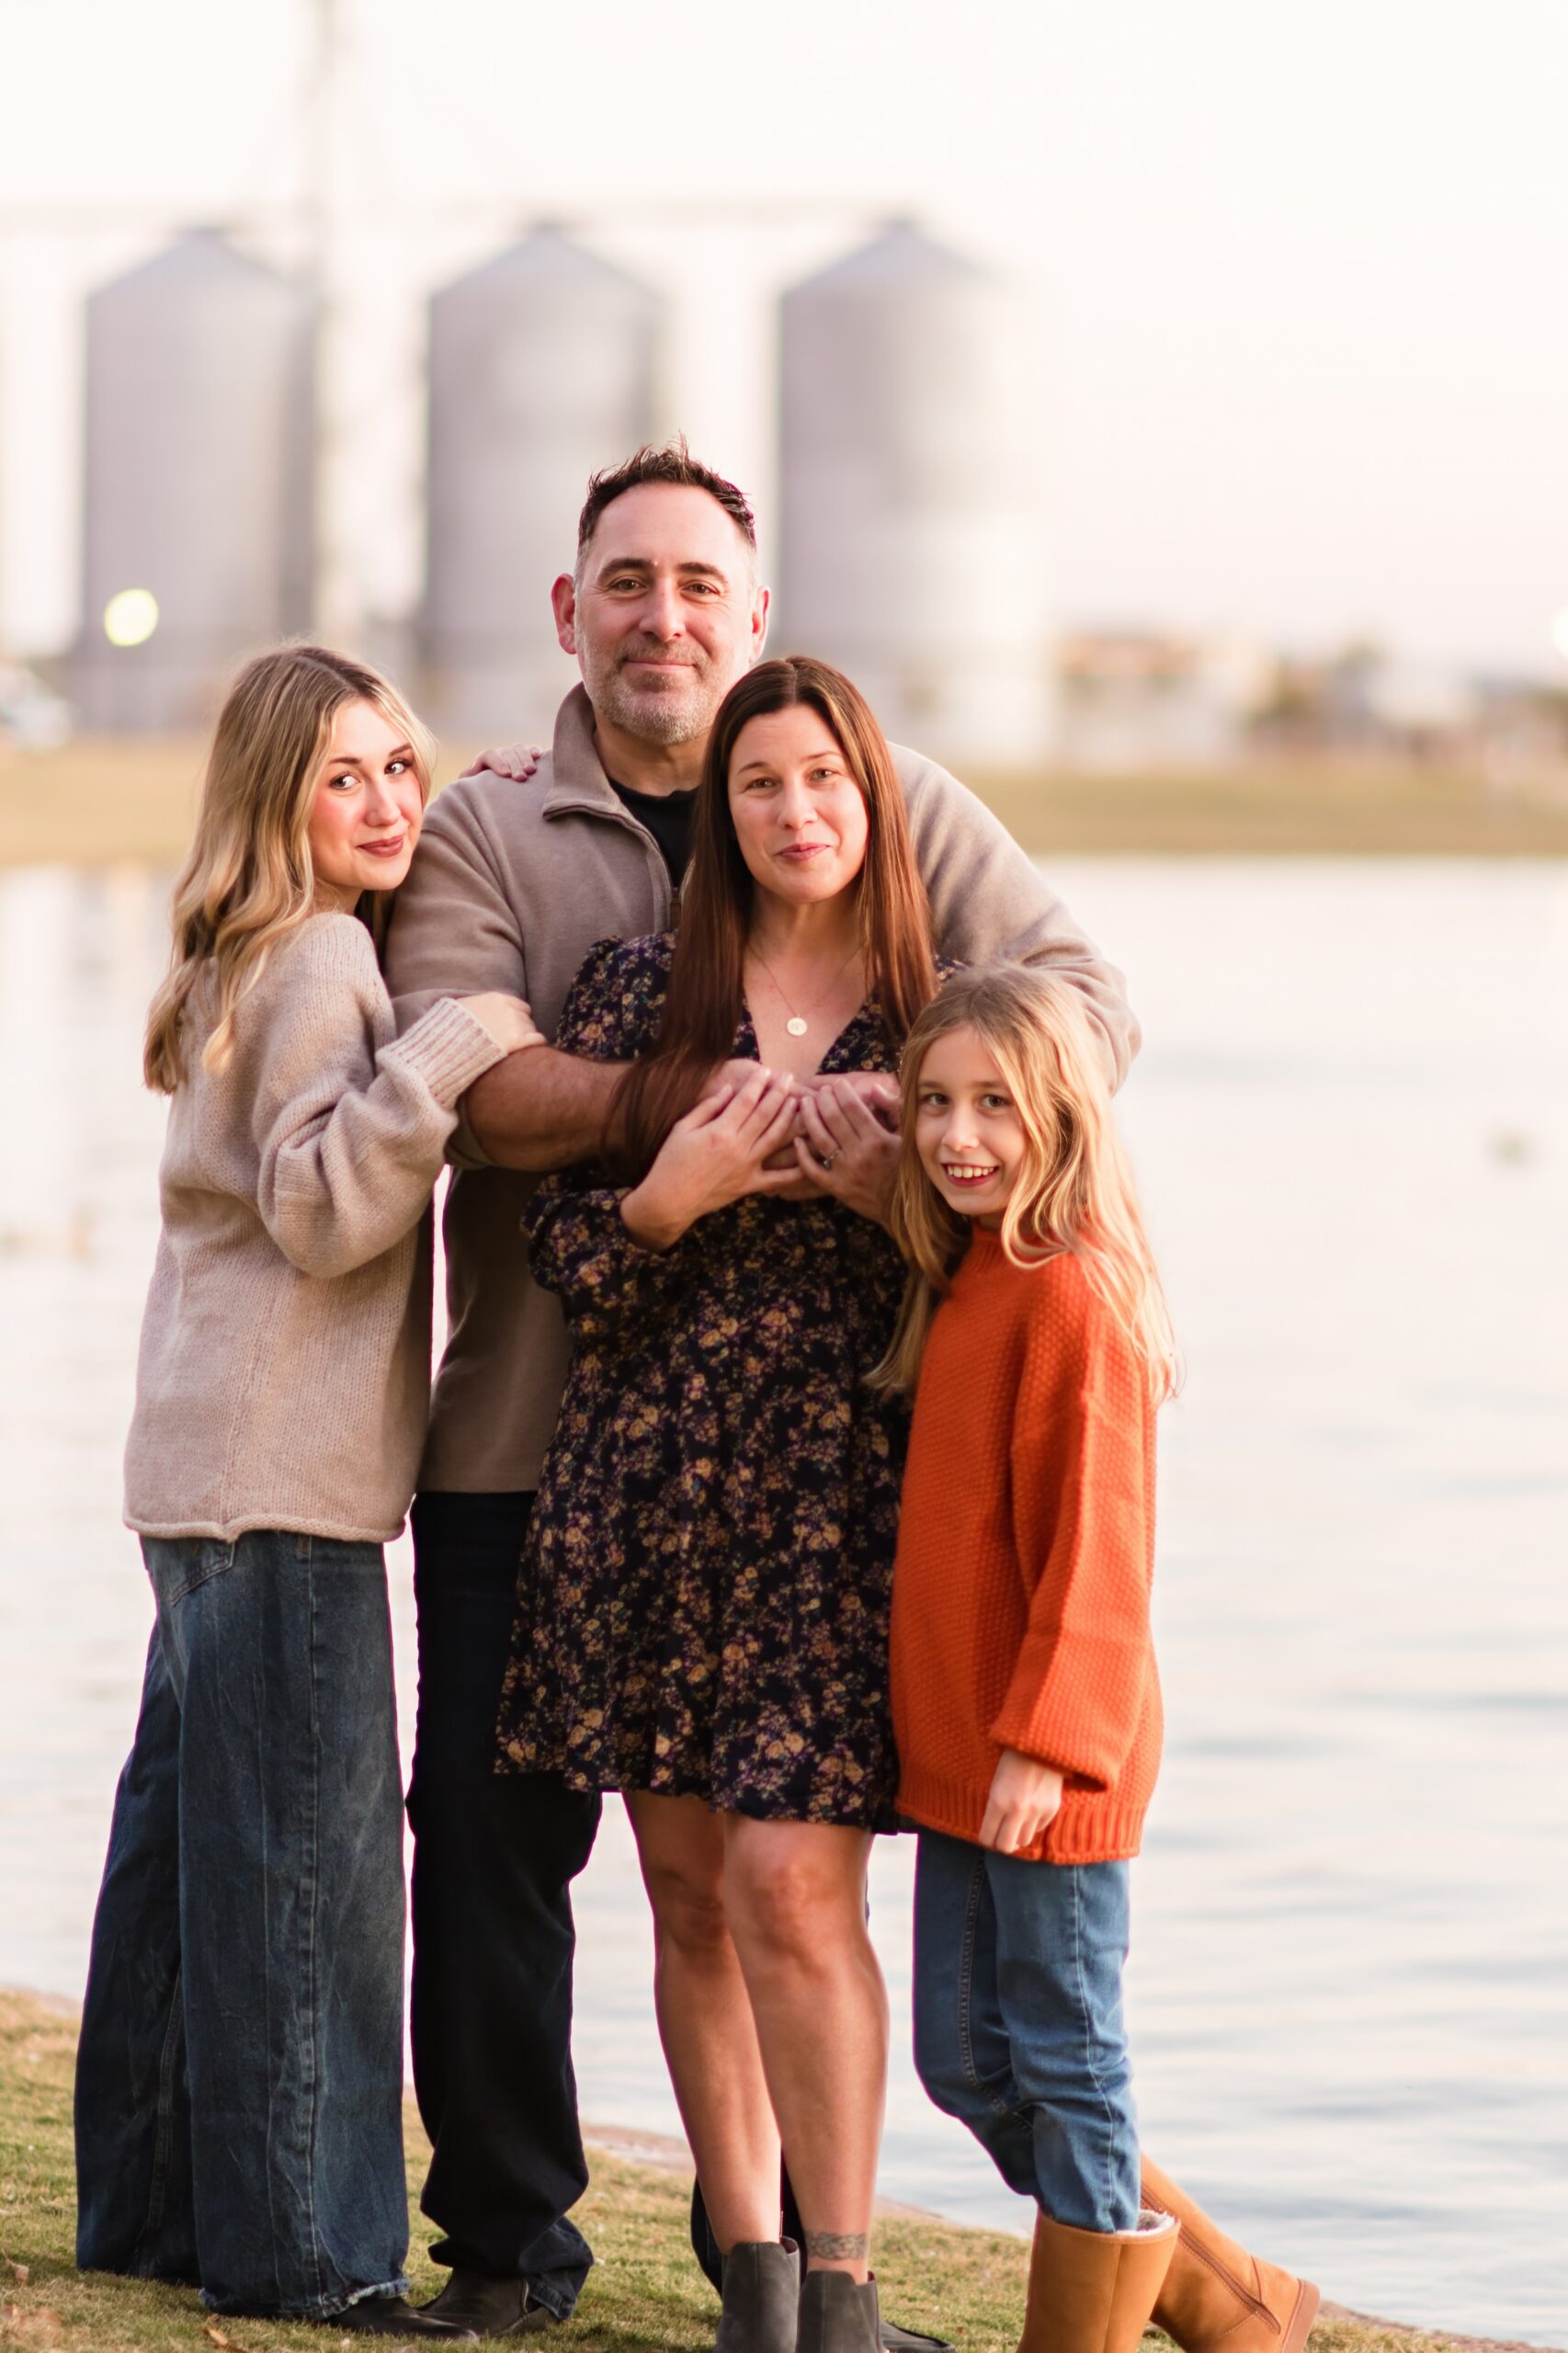 Mom, Dad, and two sisters standing on grass in front of a lake next to the silos in Gilbert, AZ. The girls and father are wearing jeans and a light sweater while the mother is wearing a floral print dress.